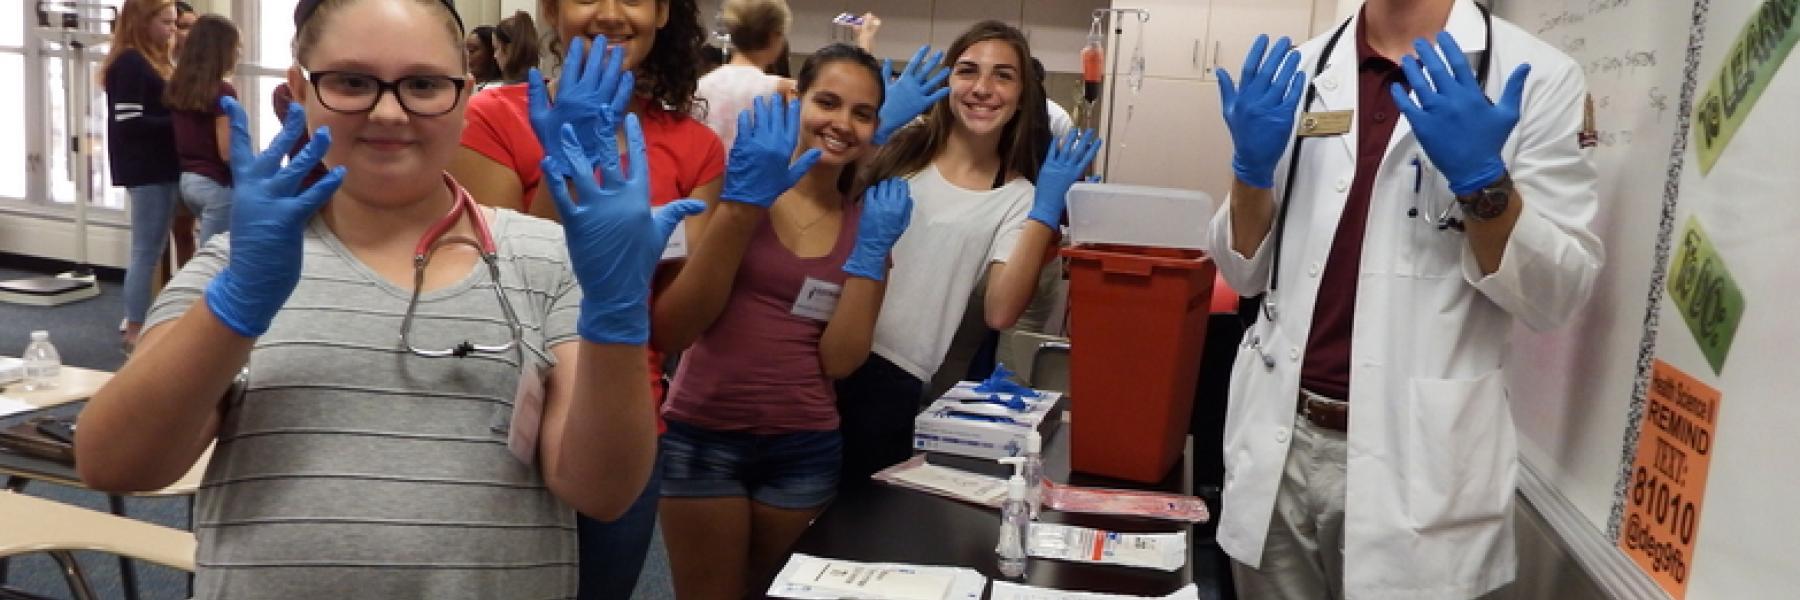 SSTRIDE students holding up hands wearing latex gloves